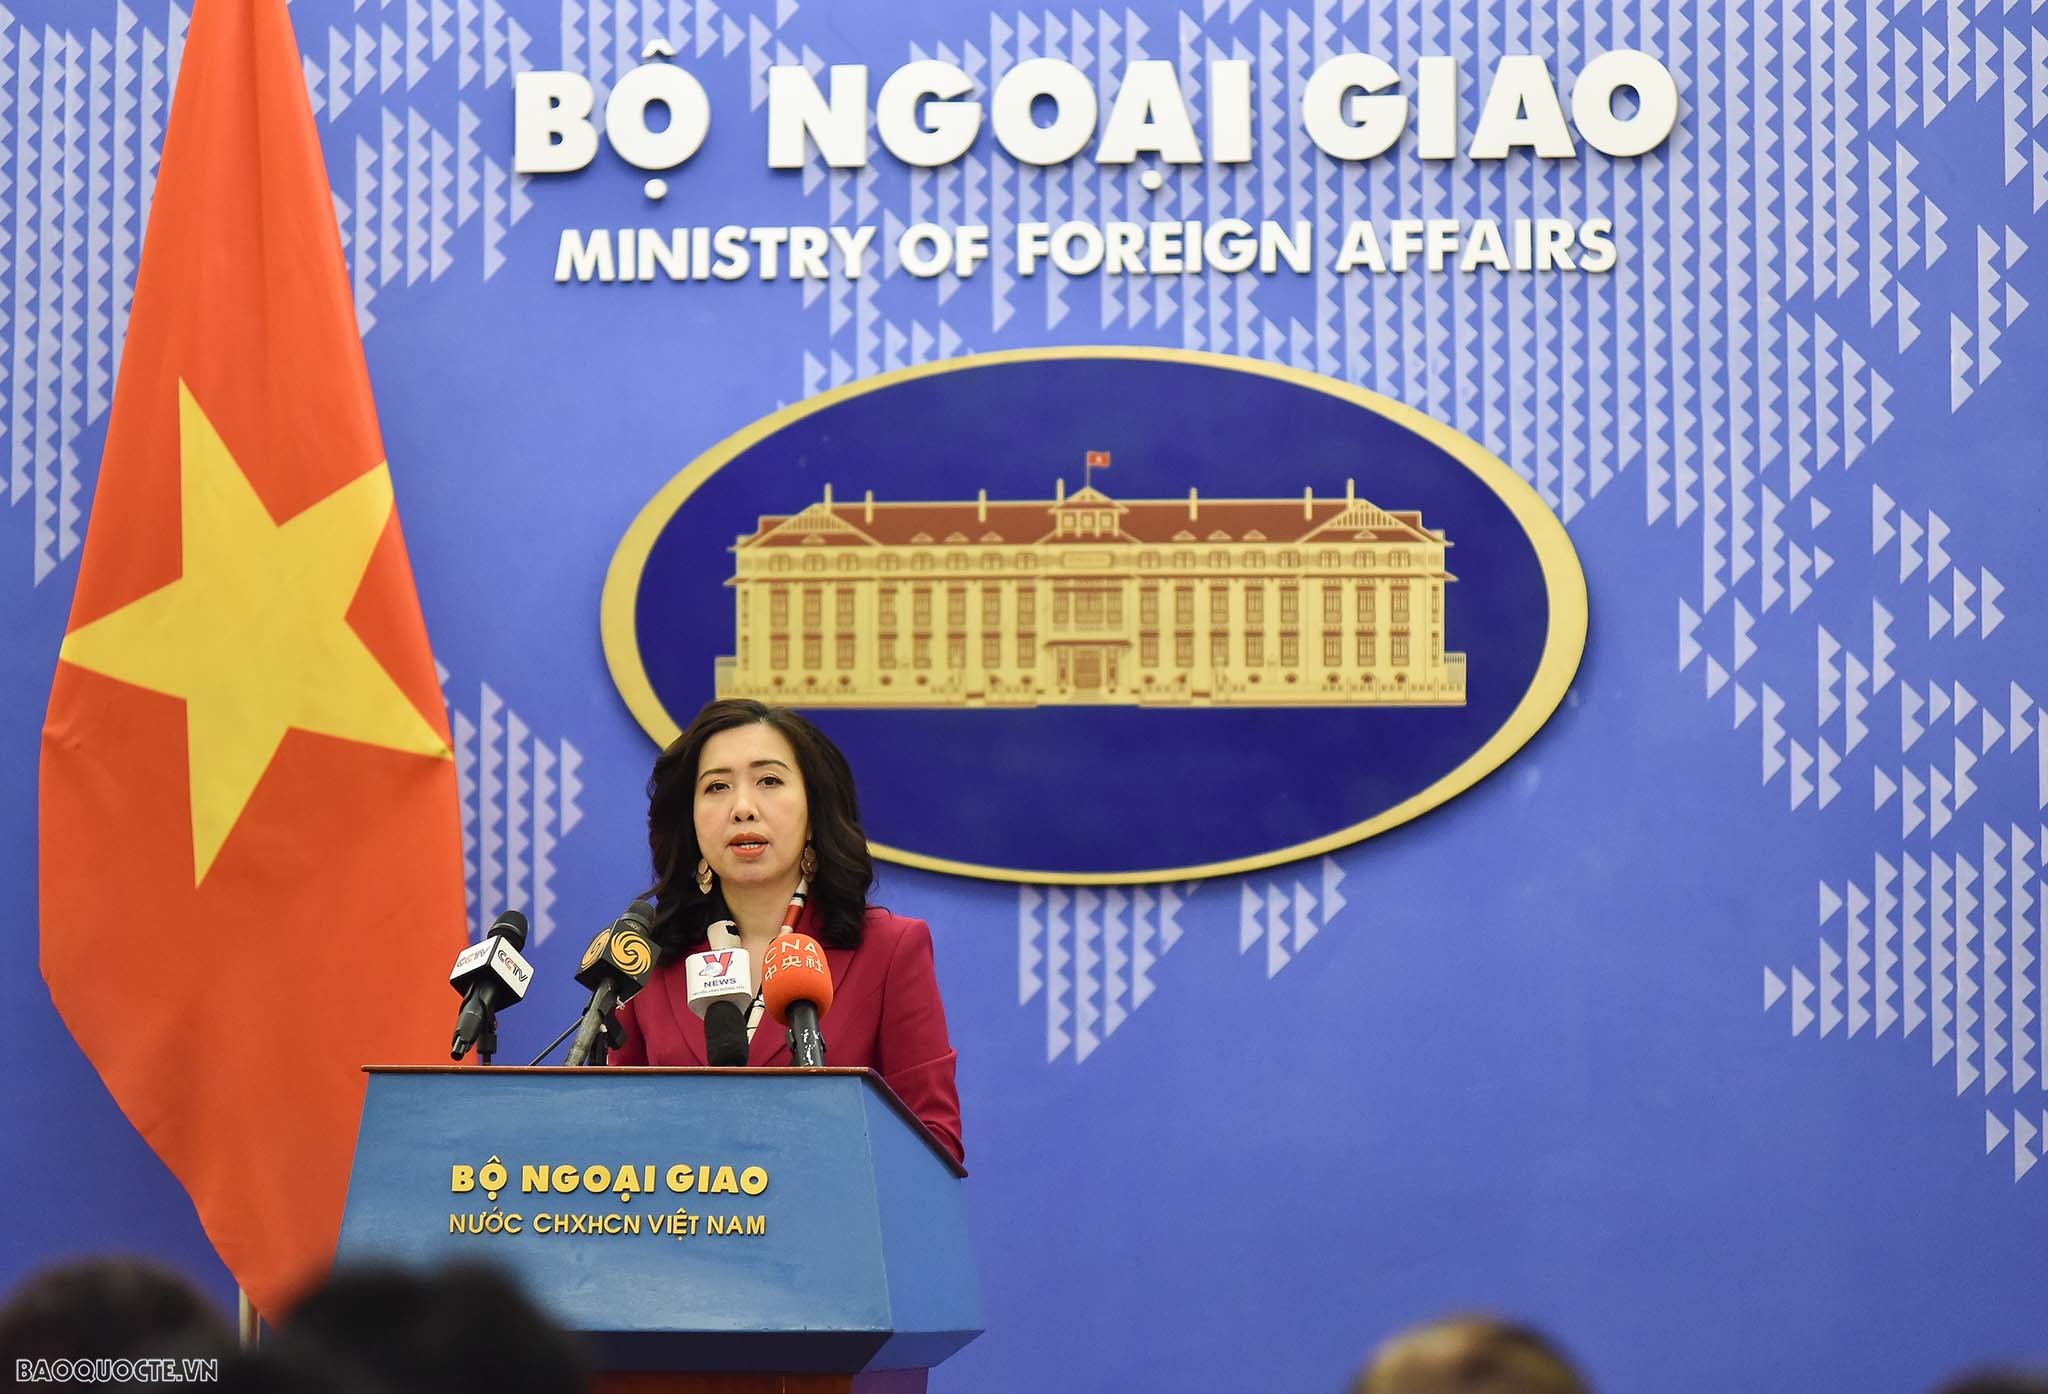 Situation of Vietnamese workers in Africa sees certain improvements: Spokesperson